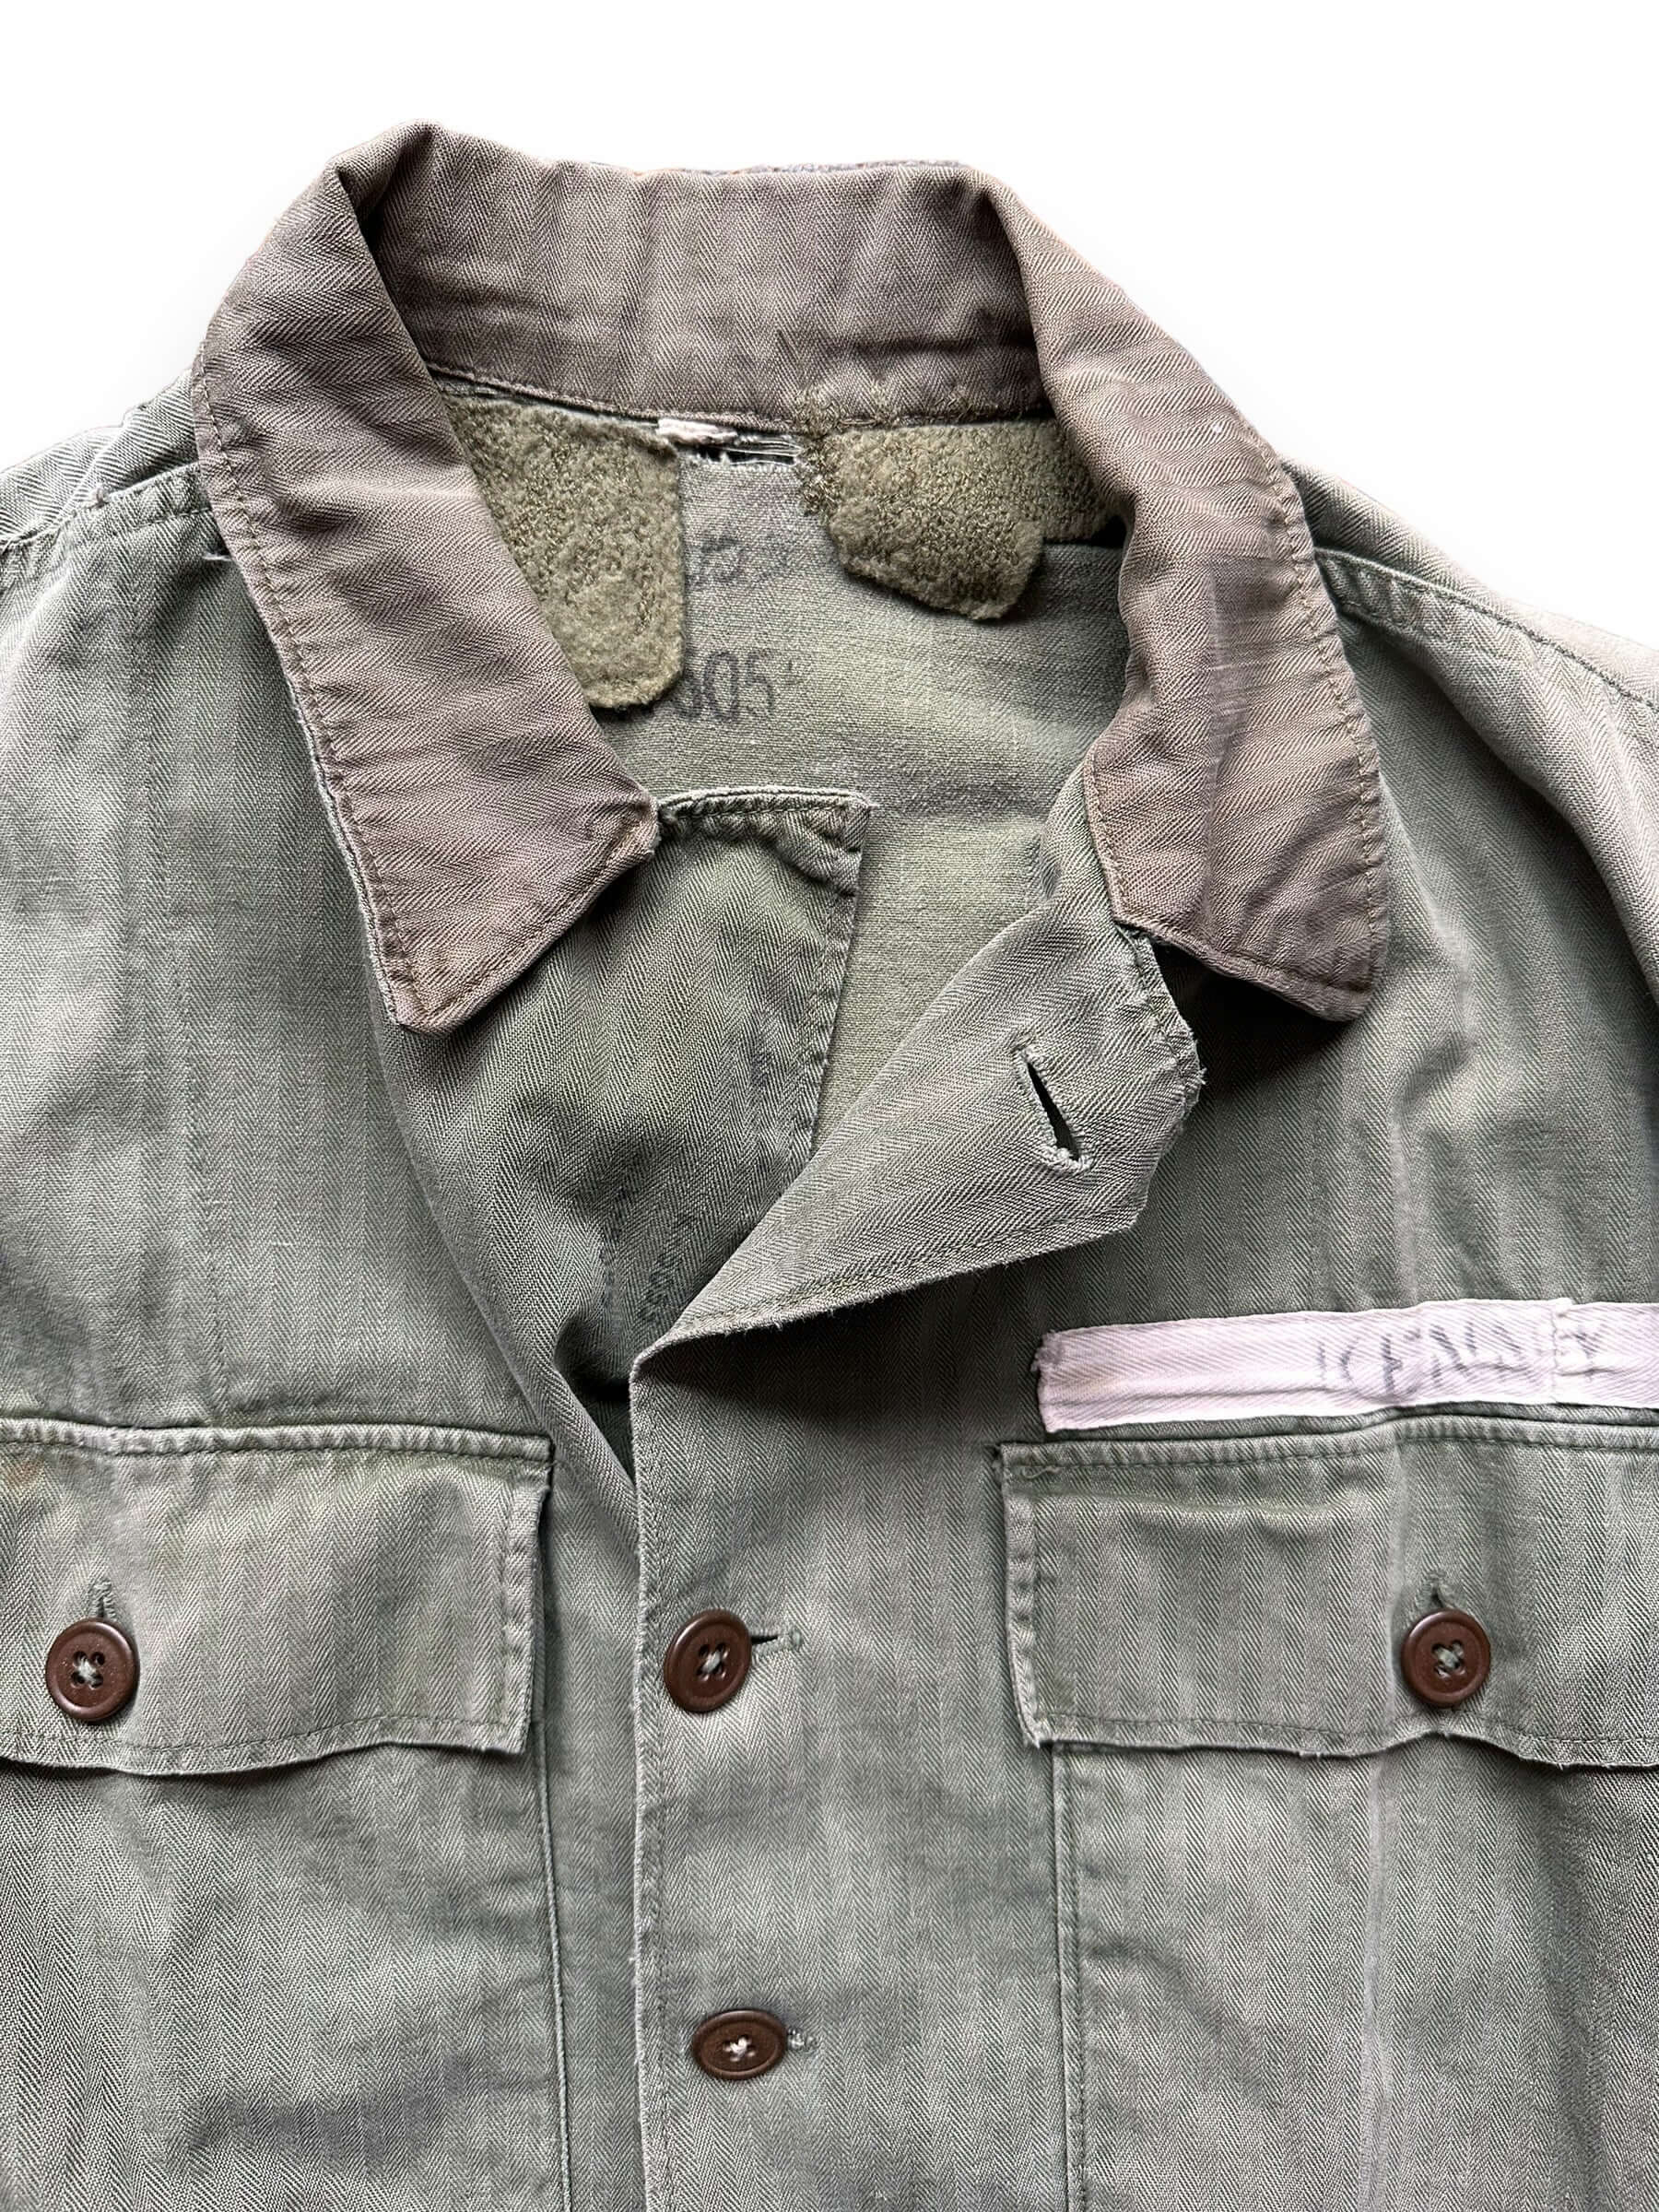 collar of Vintage HBT "Kenny" Repaired Jacket SZ L | Vintage Military Jackets Seattle | Barn Owl Vintage Clothing Seattle